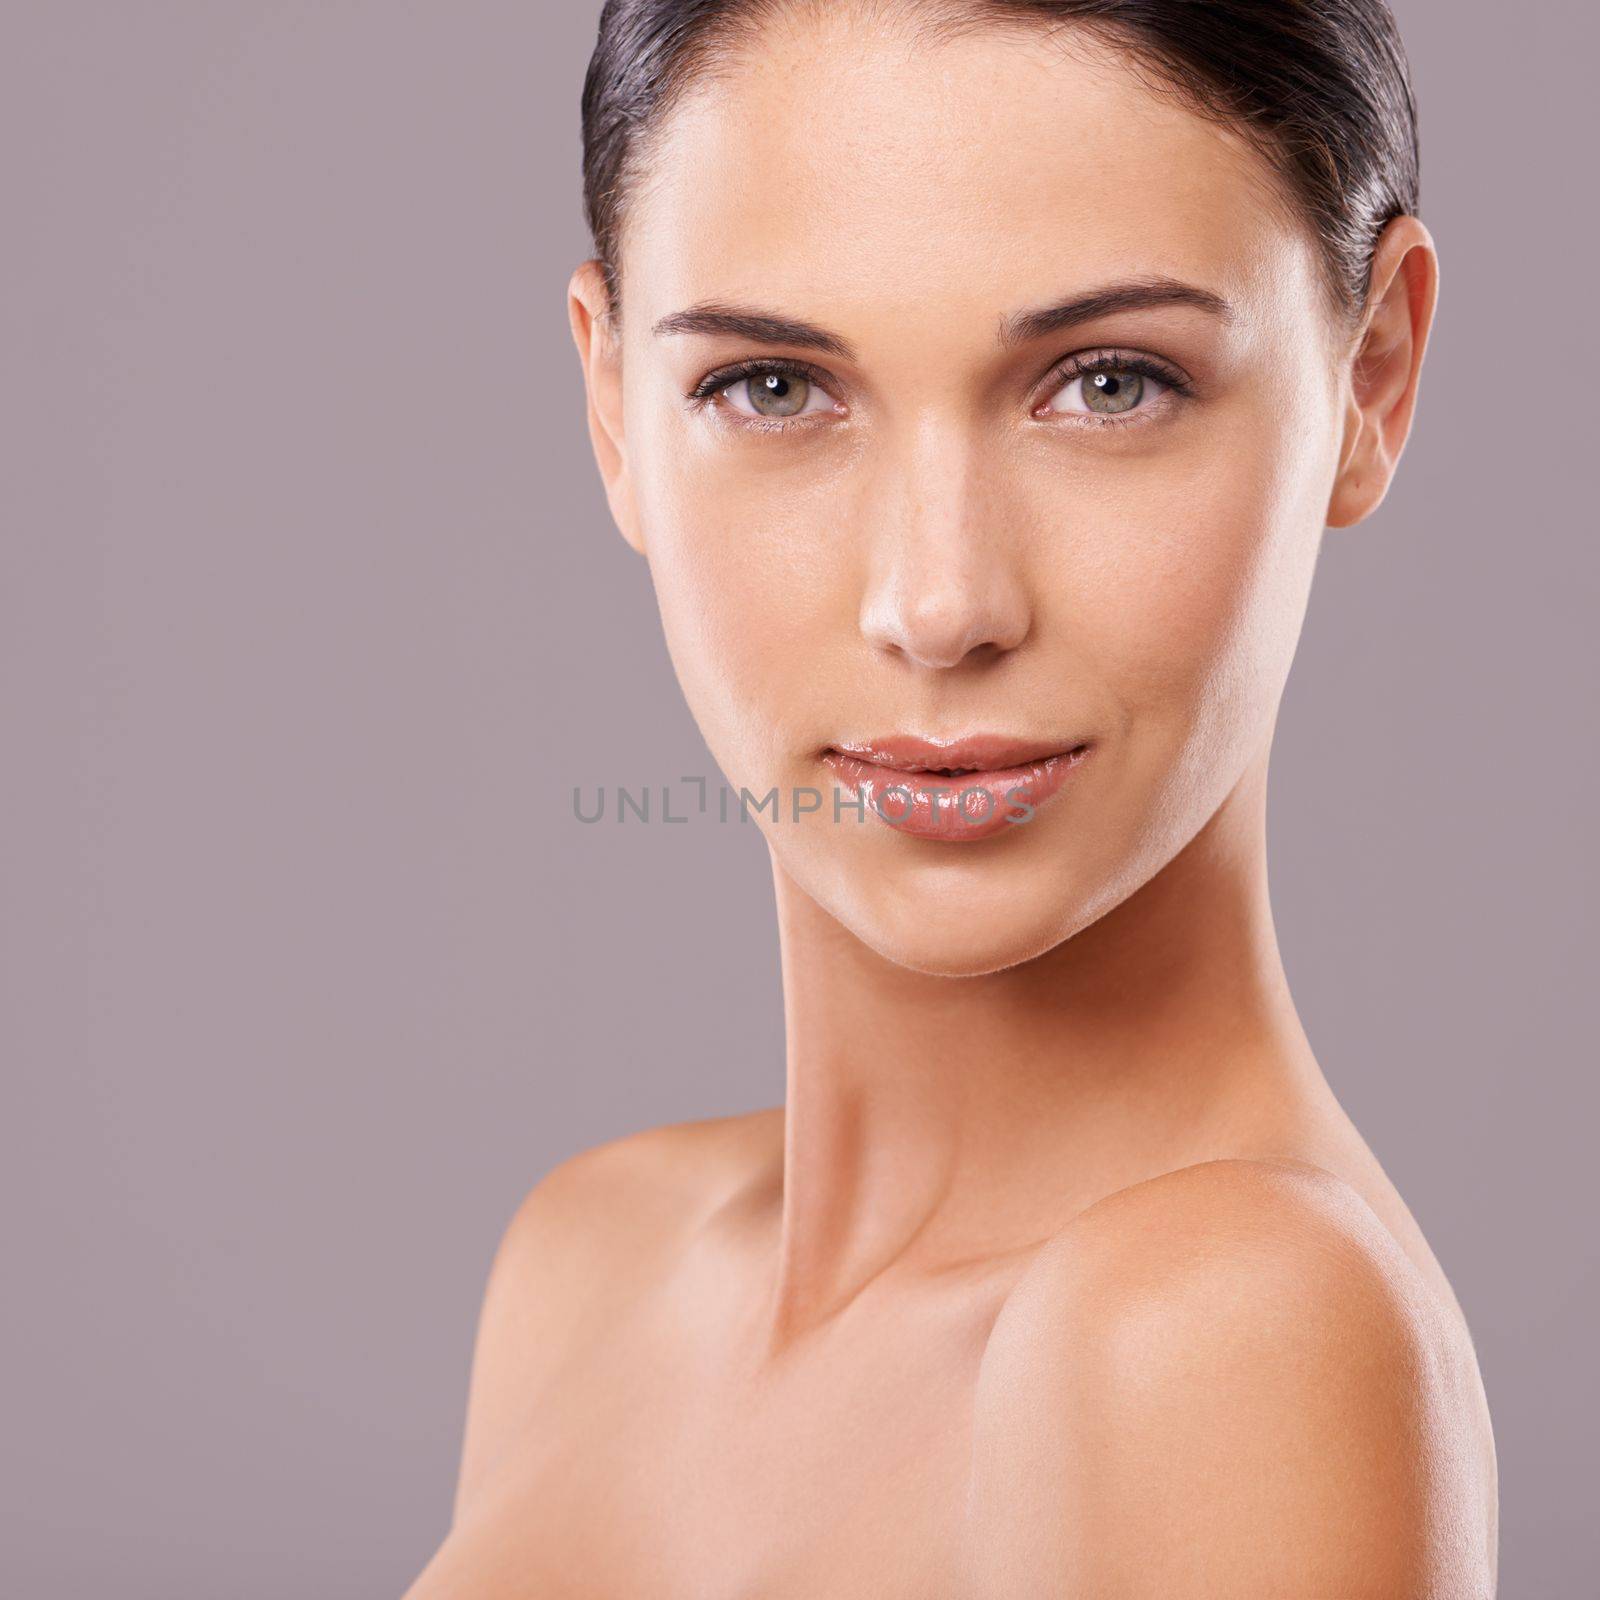 Uniquely beautiful. Beauty shot of a beautiful young woman with perfect skin against a gray background